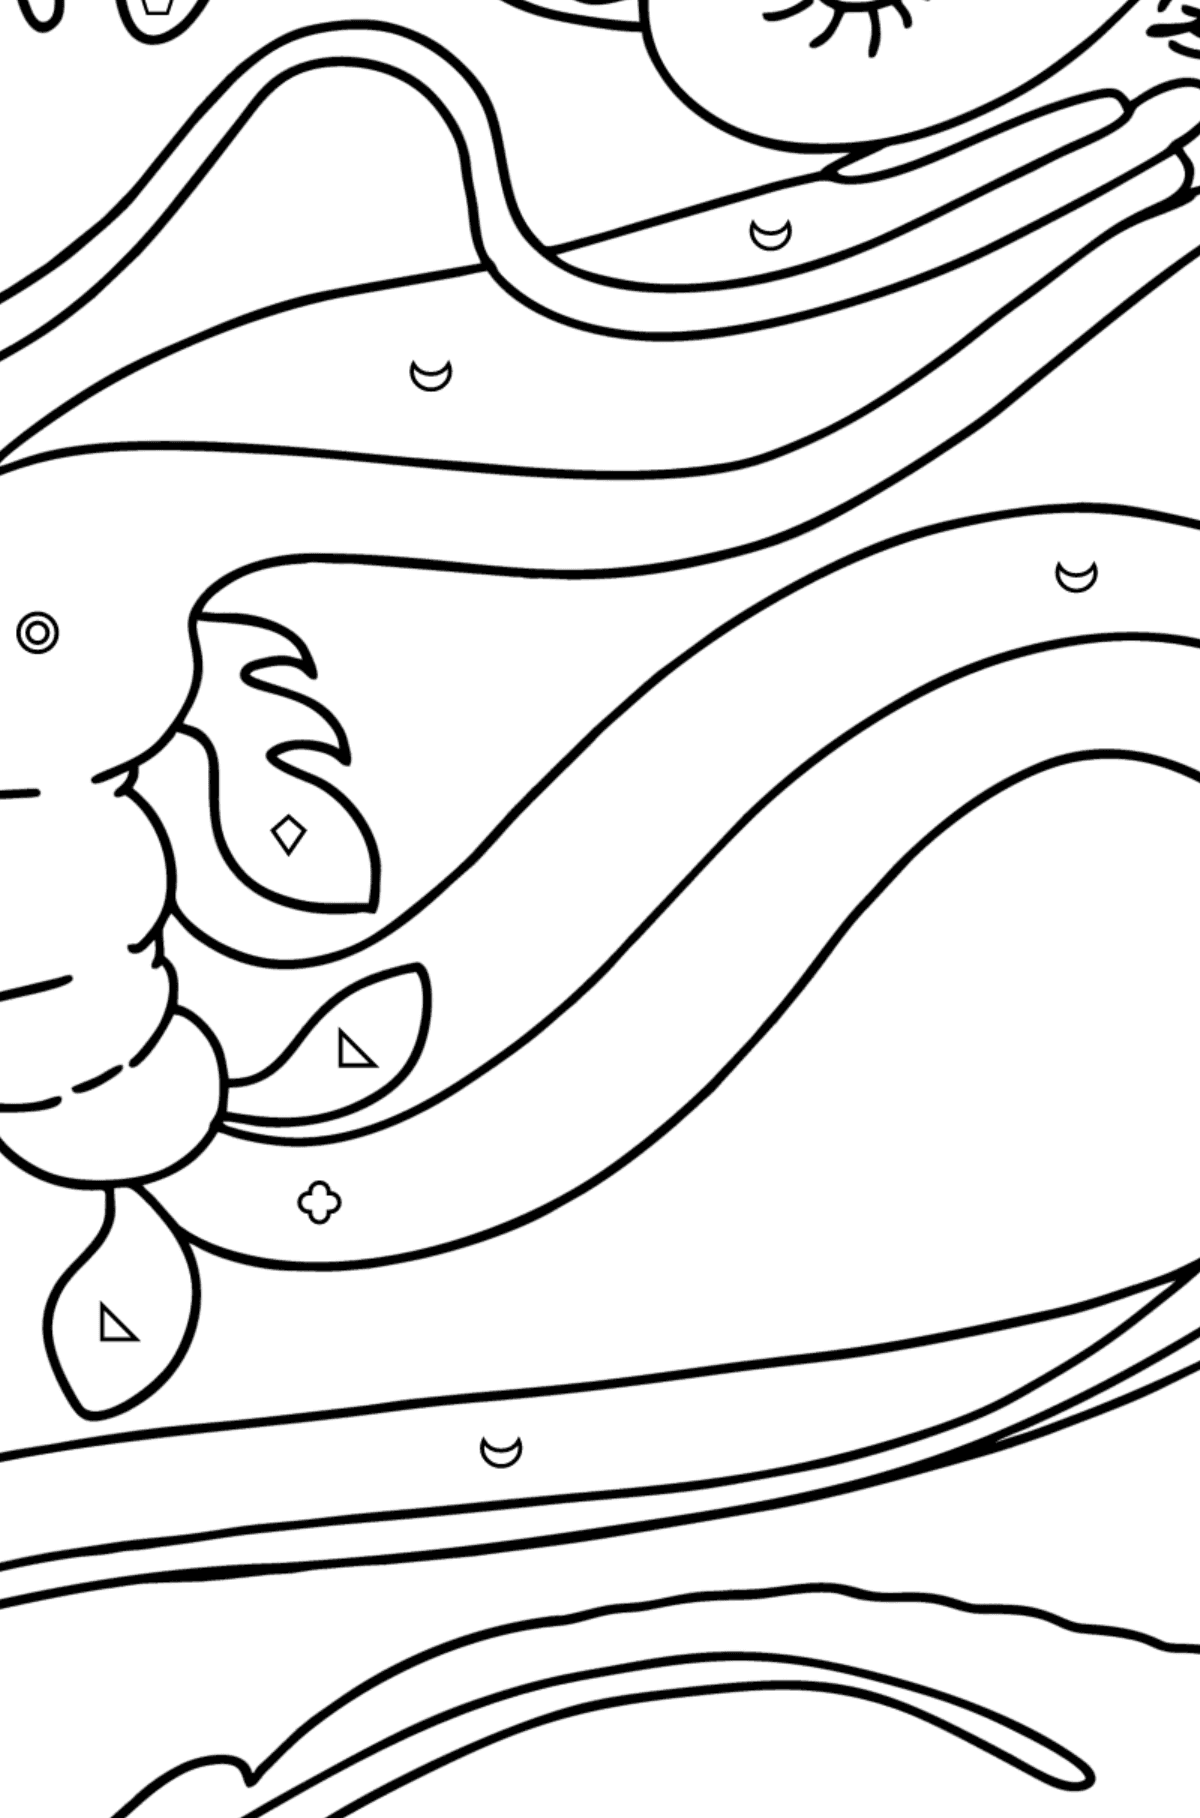 Snake Dragon coloring page - Coloring by Geometric Shapes for Kids